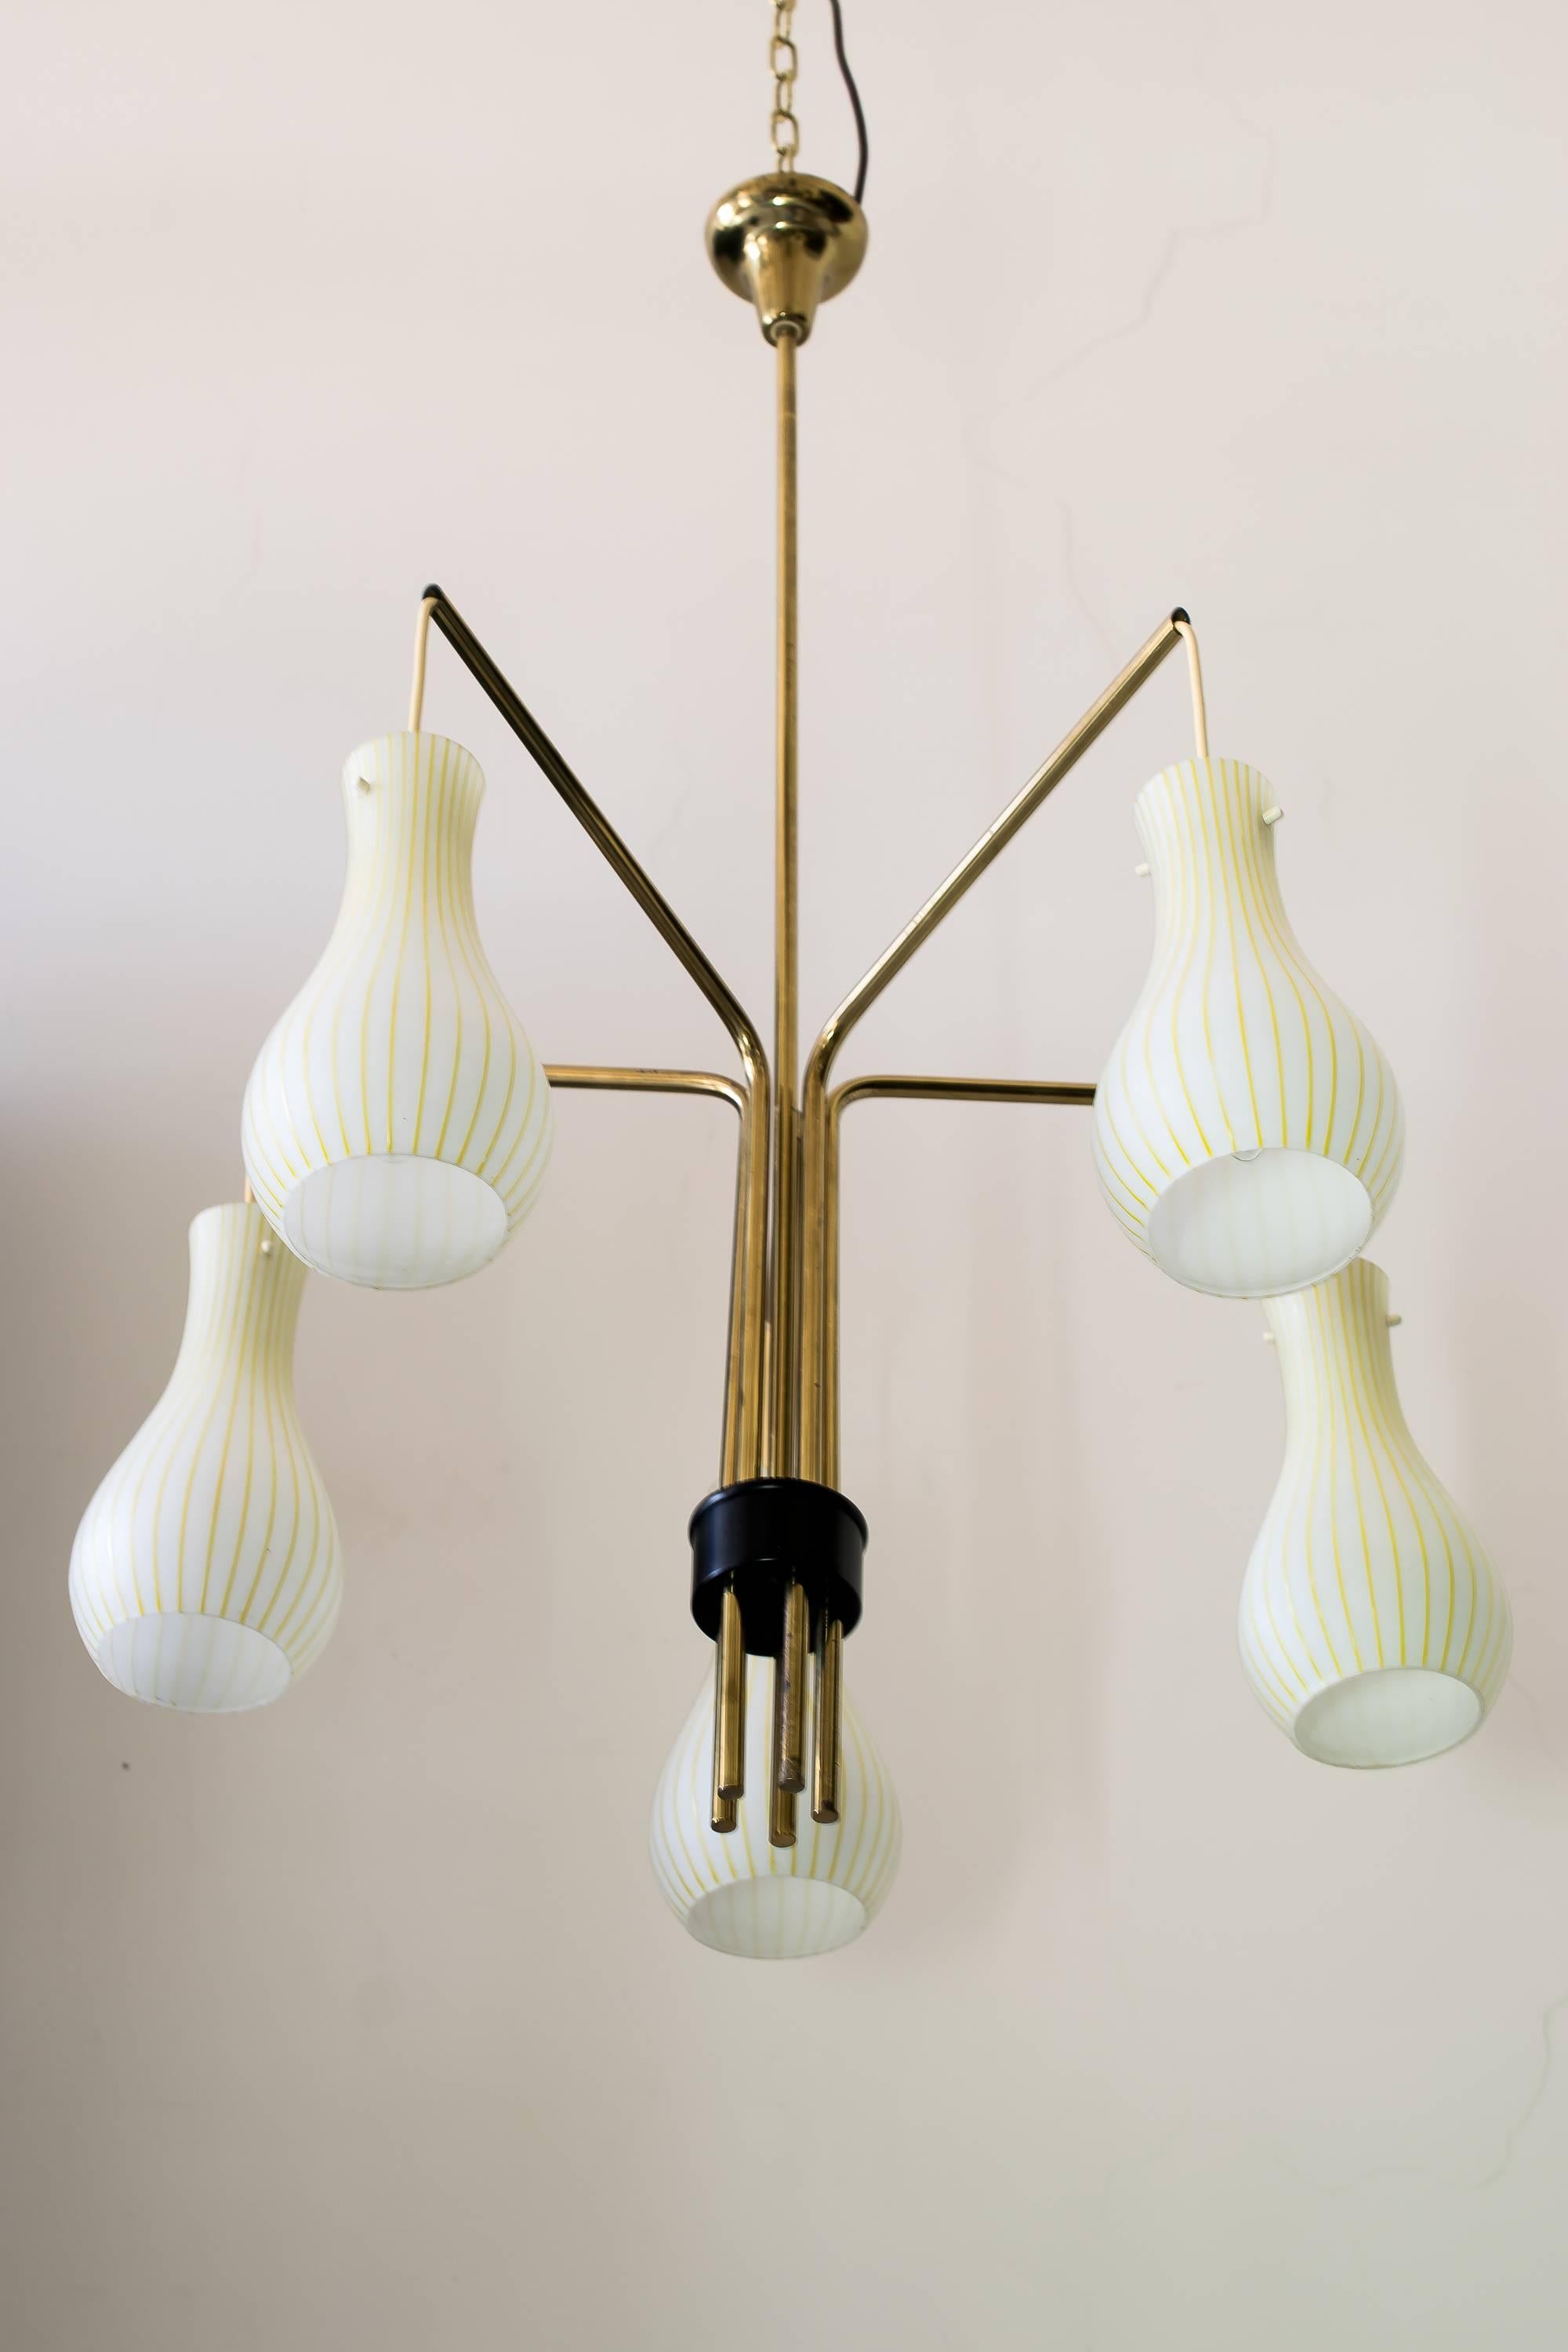 Mid-Century Modern Chandelier Five-Arm with Original Glass Italian, circa 1960s For Sale